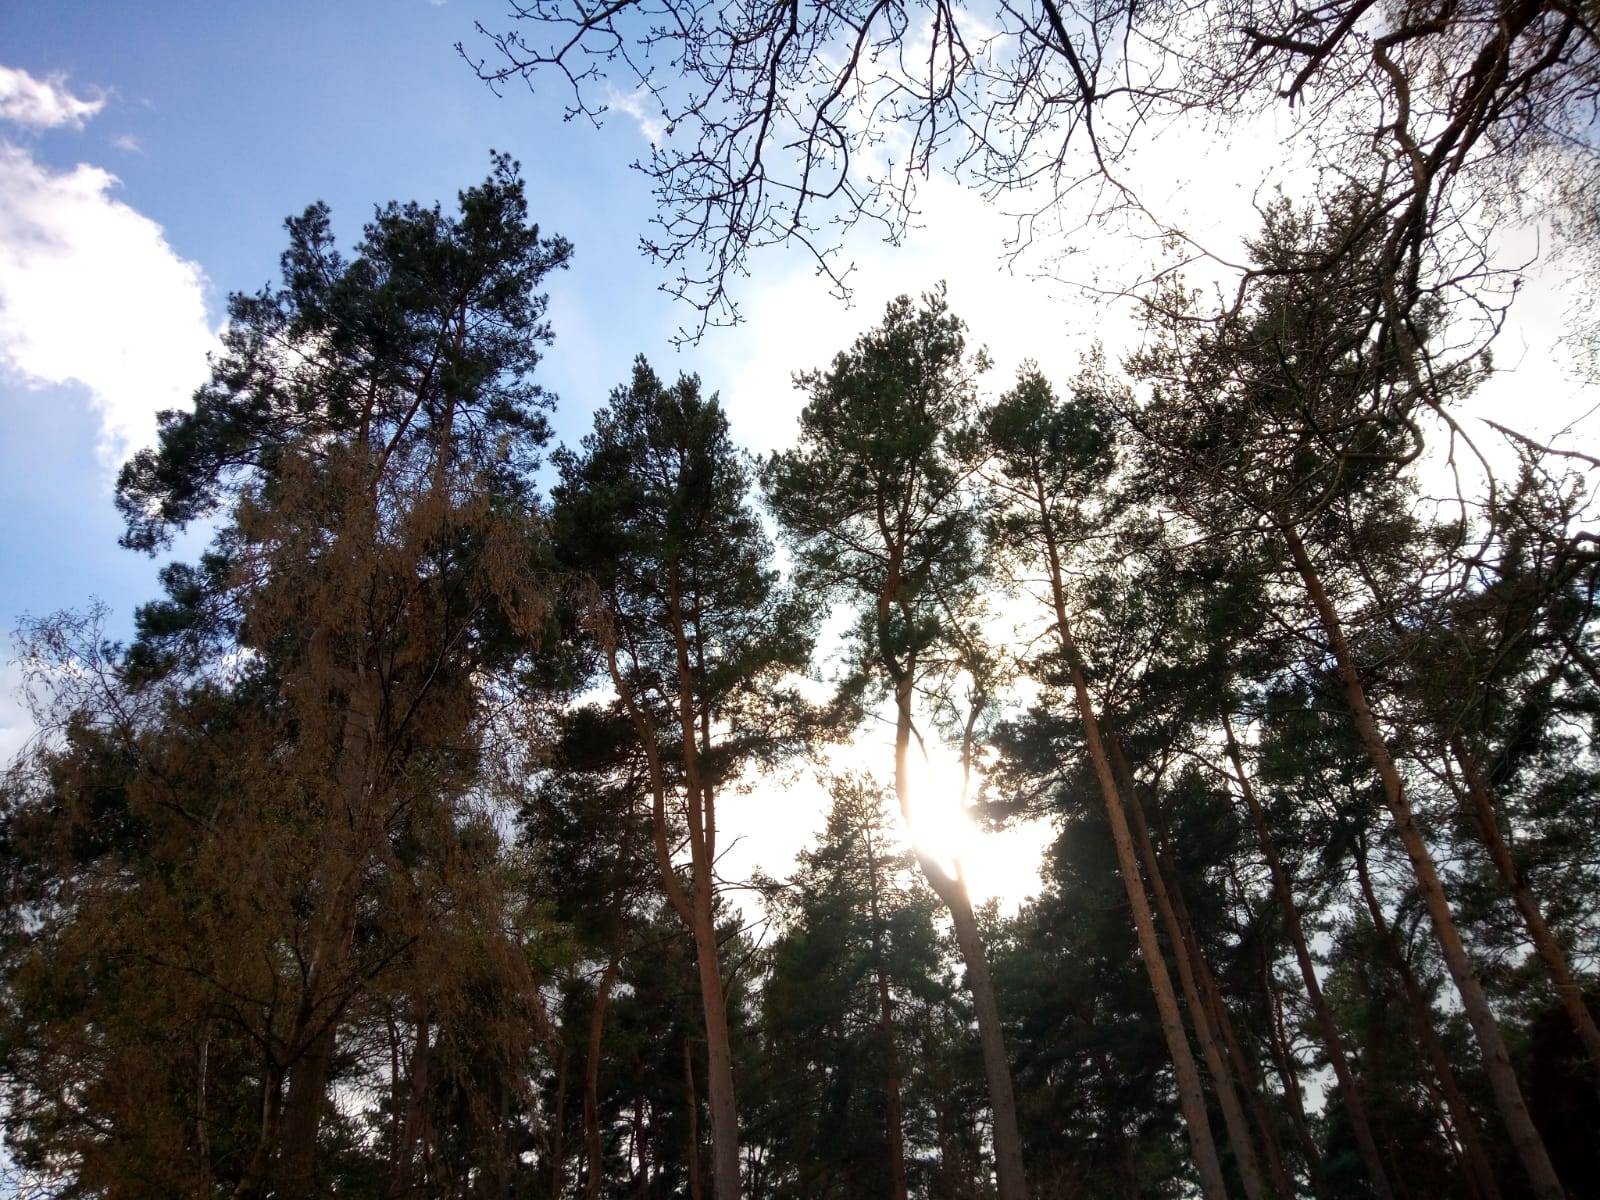 View of the tops of some tall Scots pine trees with sun shining through